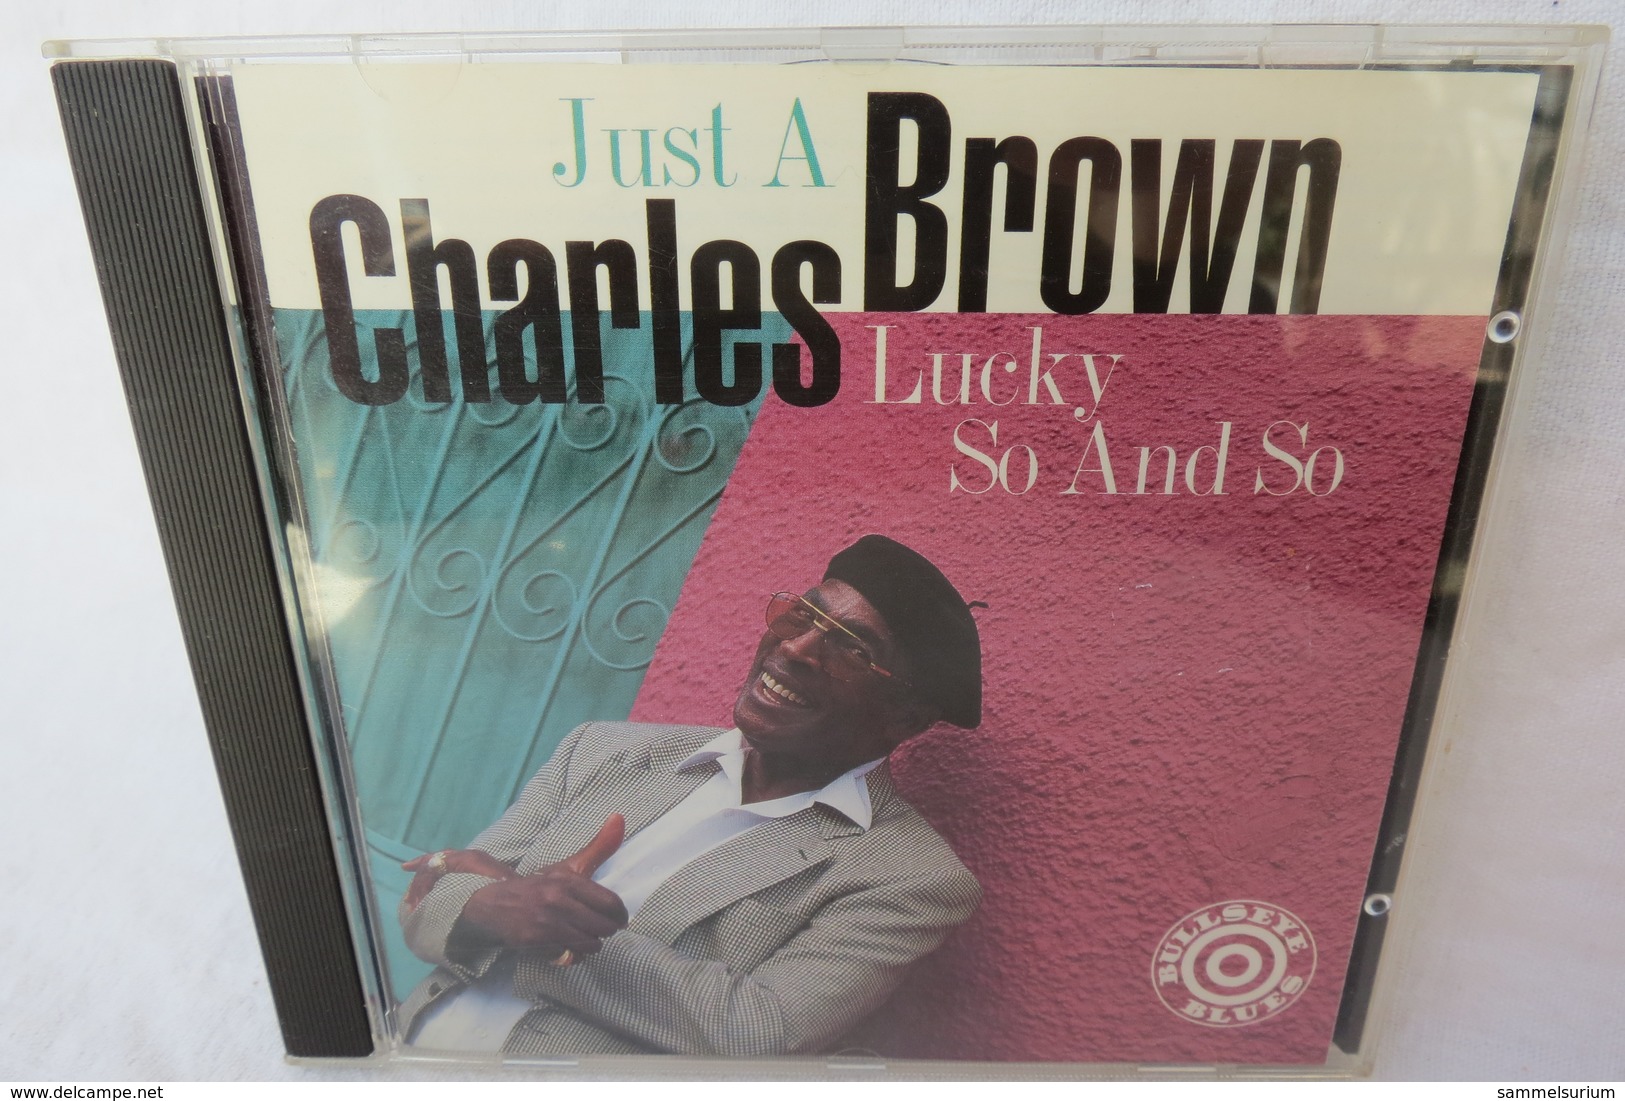 CD "Charles Brown" Just A Lucky So And So - Blues